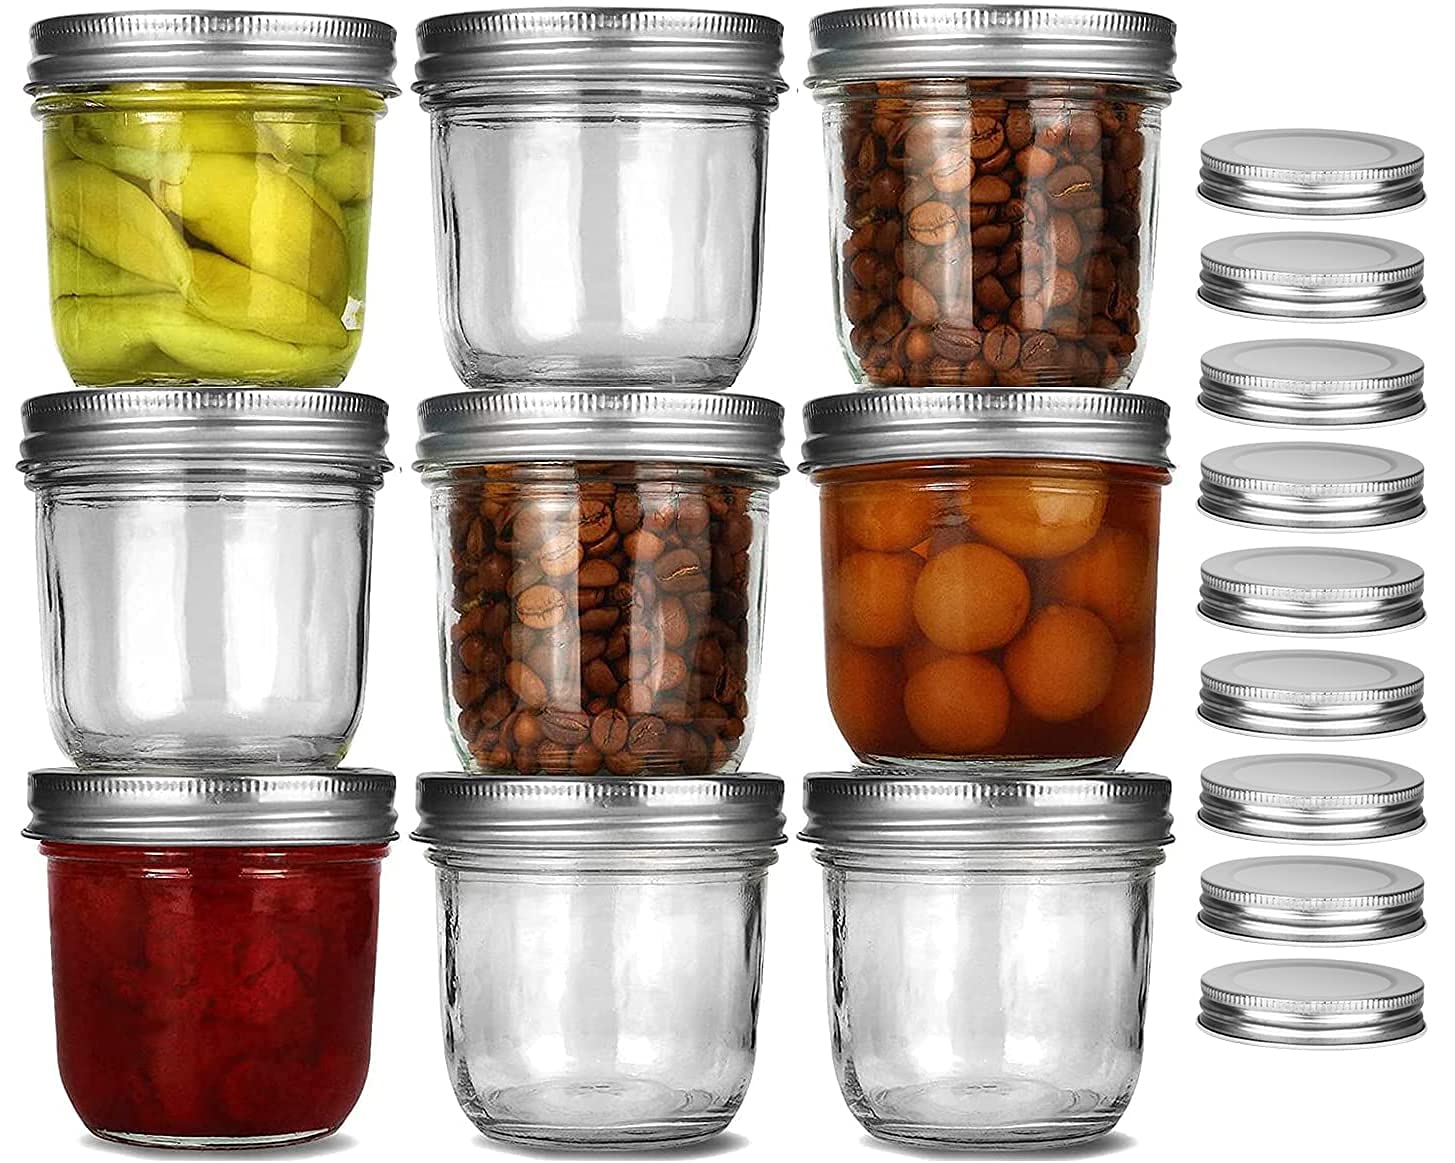 KAMOTA Wide Mouth Mason Jars 9 PACK 8 oz With Wide Mouth Lids and Bands, Ideal for Jam, Honey, Wedding Favors, Shower Favors, DIY Magnetic Spice Ja...